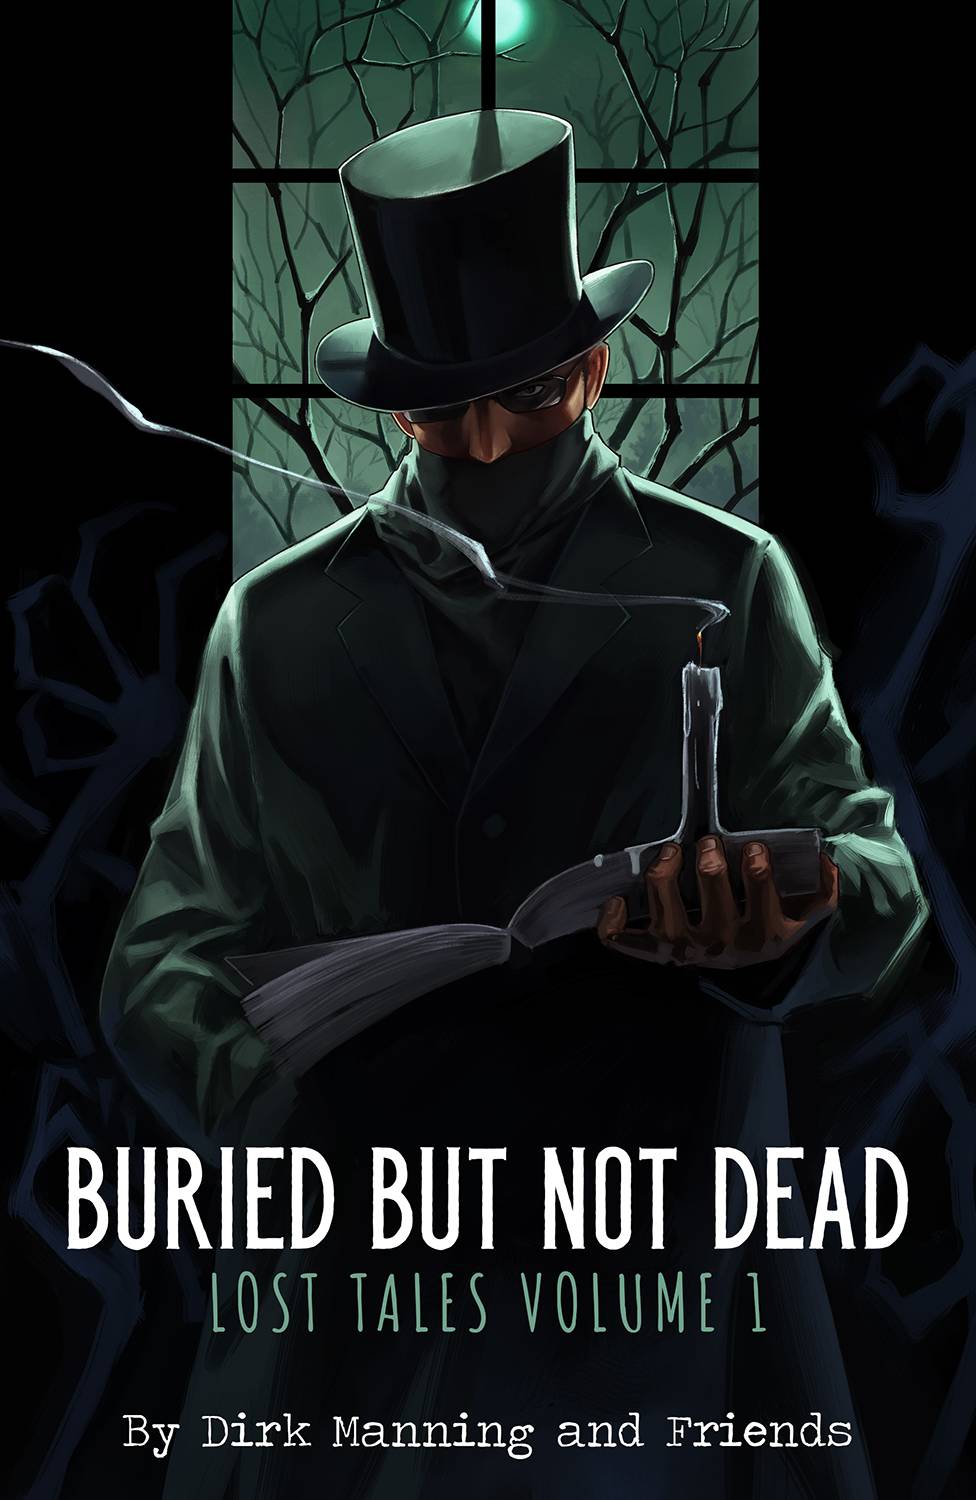 BURIED BUT NOT DEAD LOST TALES TP (MR) (C: 0-1-1) - Third Eye